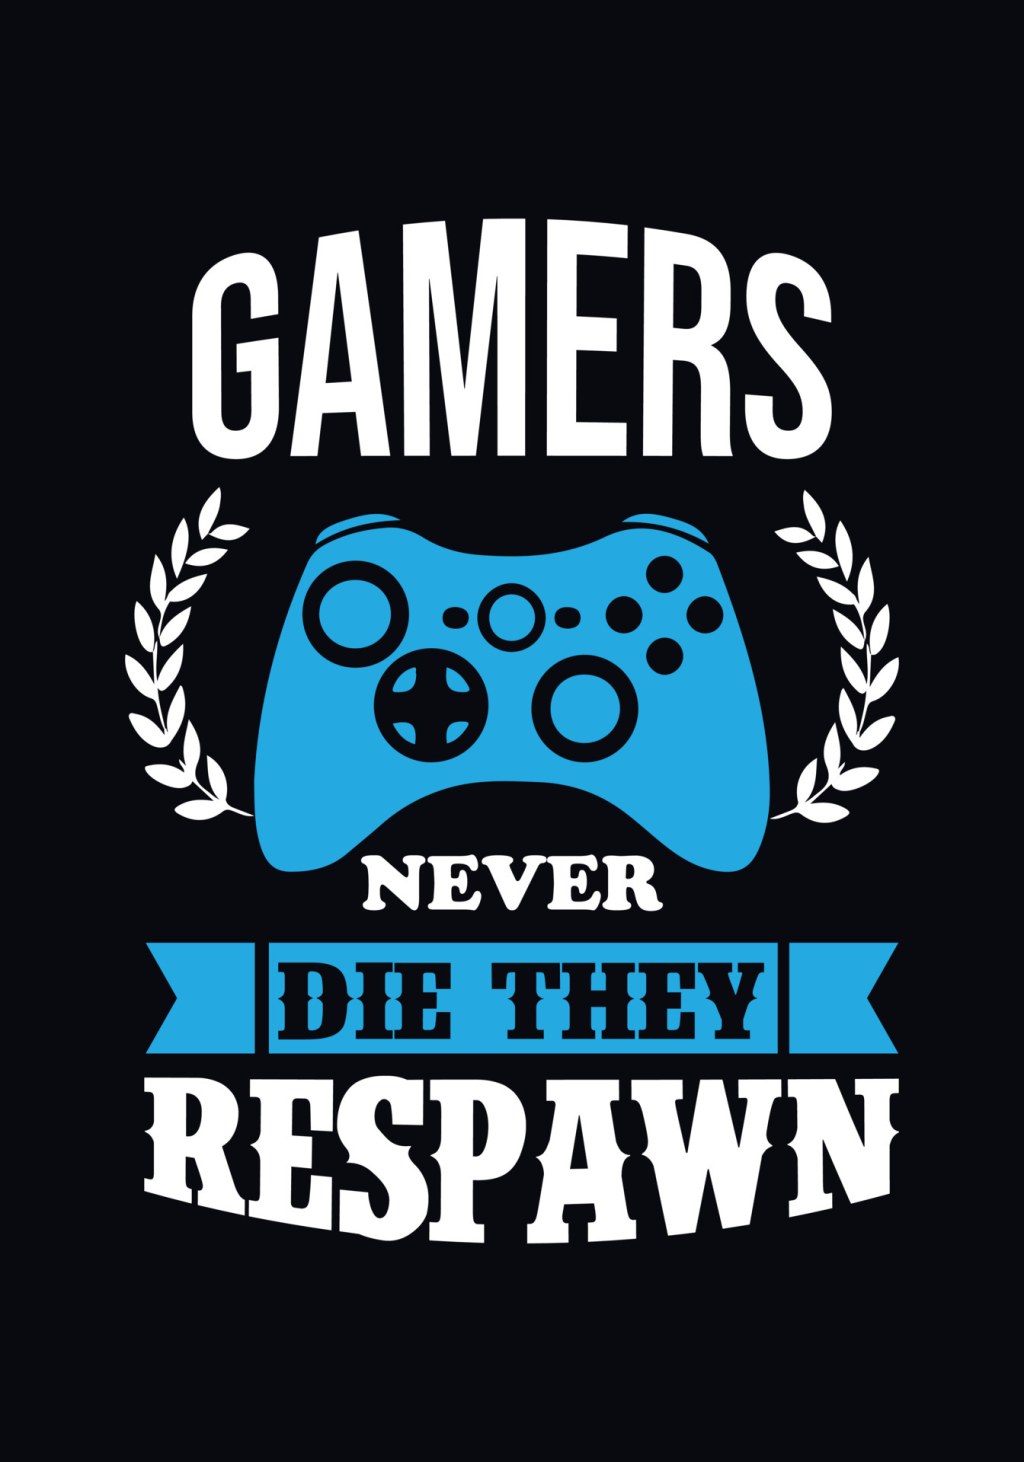 Picture of: Gamers never die, They respawn  Vector Art at Vecteezy